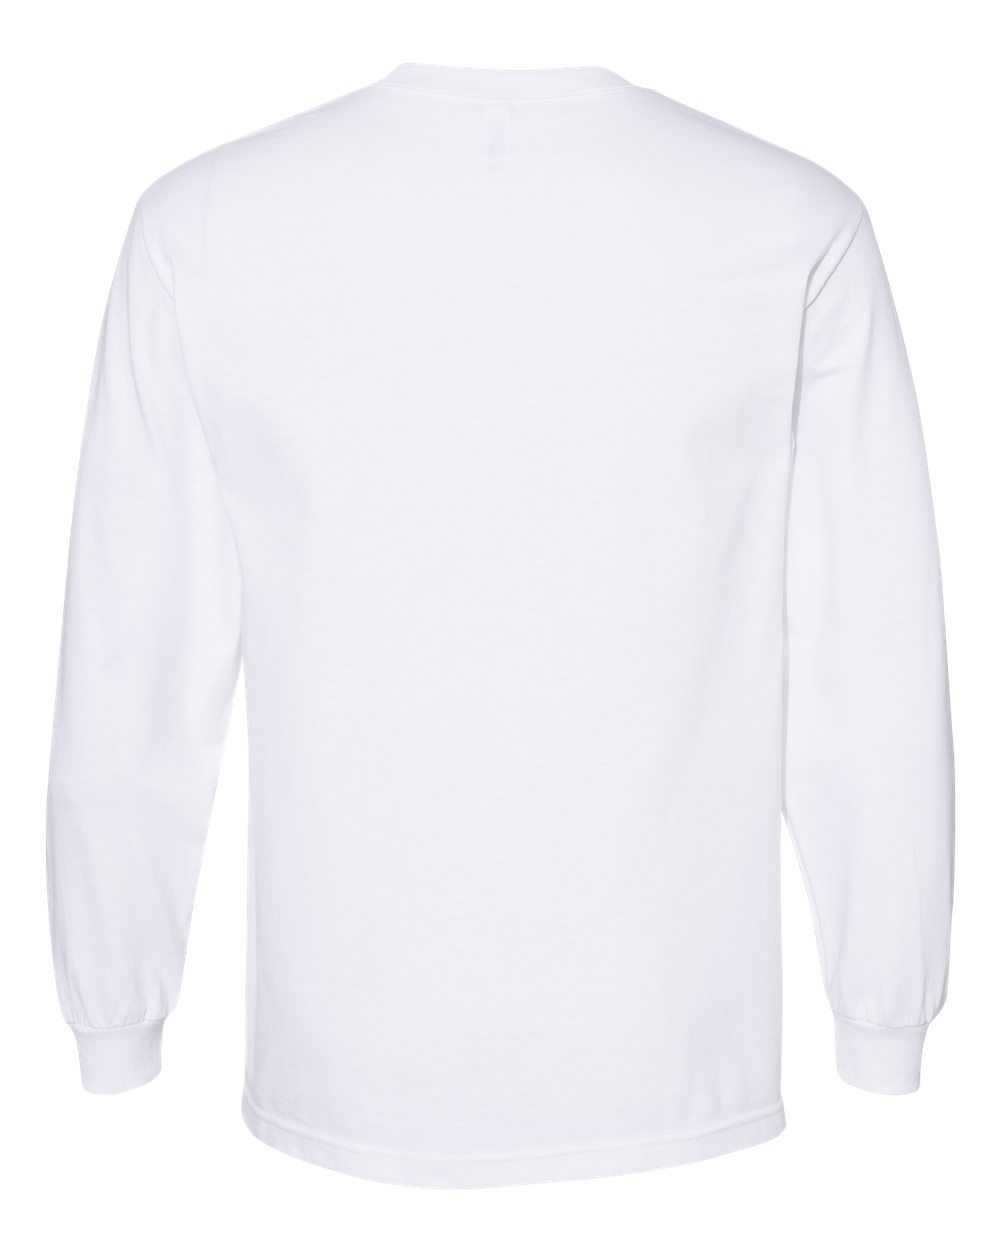 American Apparel 1304 Unisex Heavyweight Cotton Long Sleeve T-Shirt - White - HIT a Double